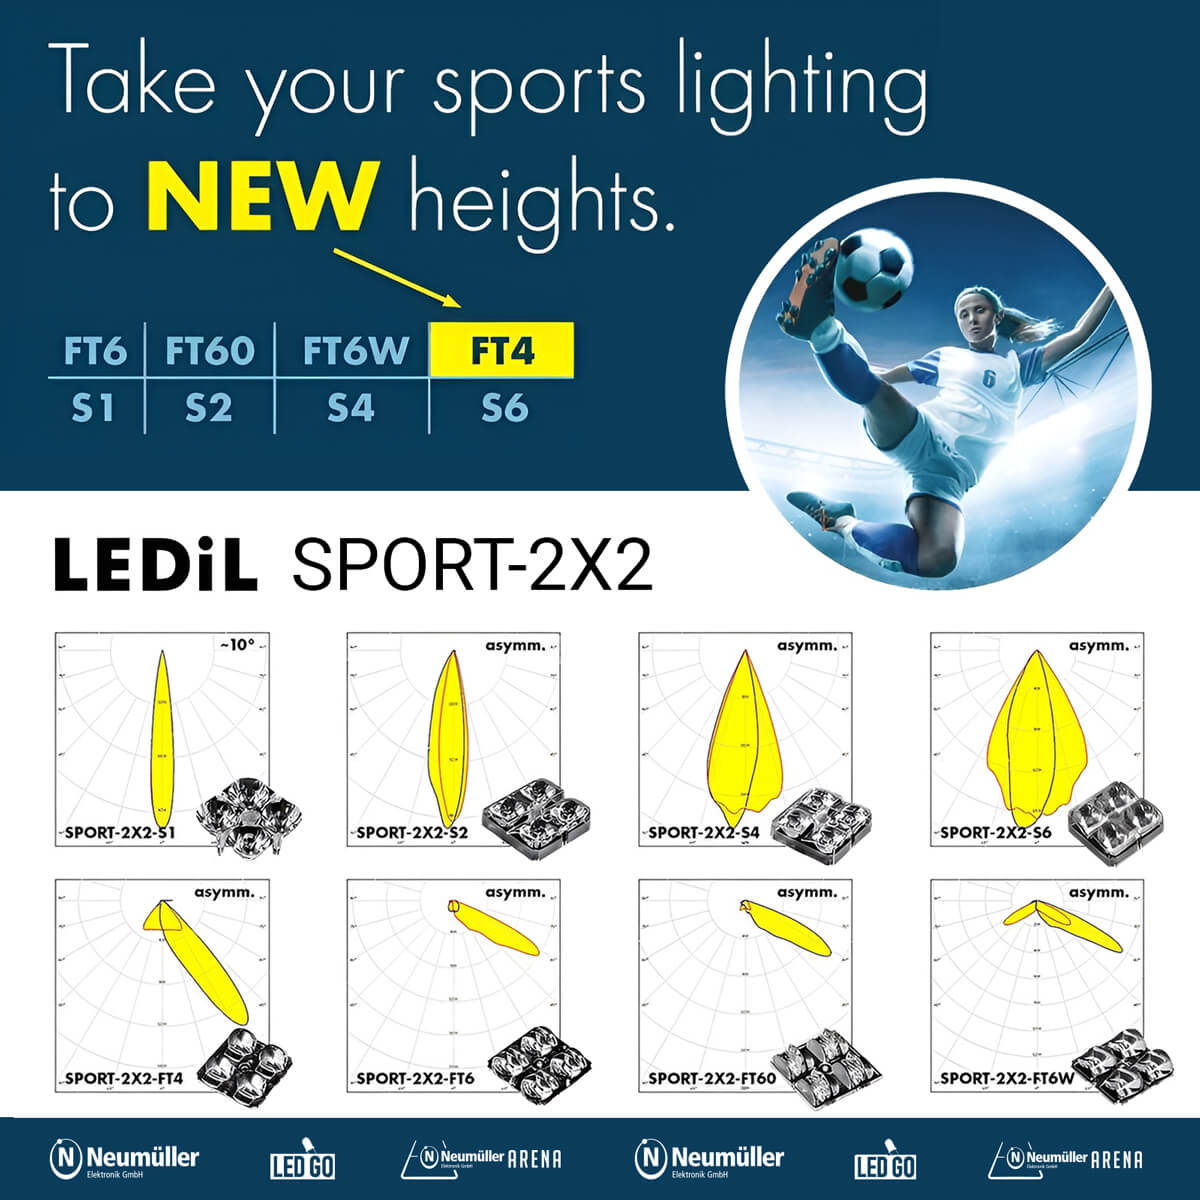 SPORT-2X2 - New low-glare optics for all types of sports lighting